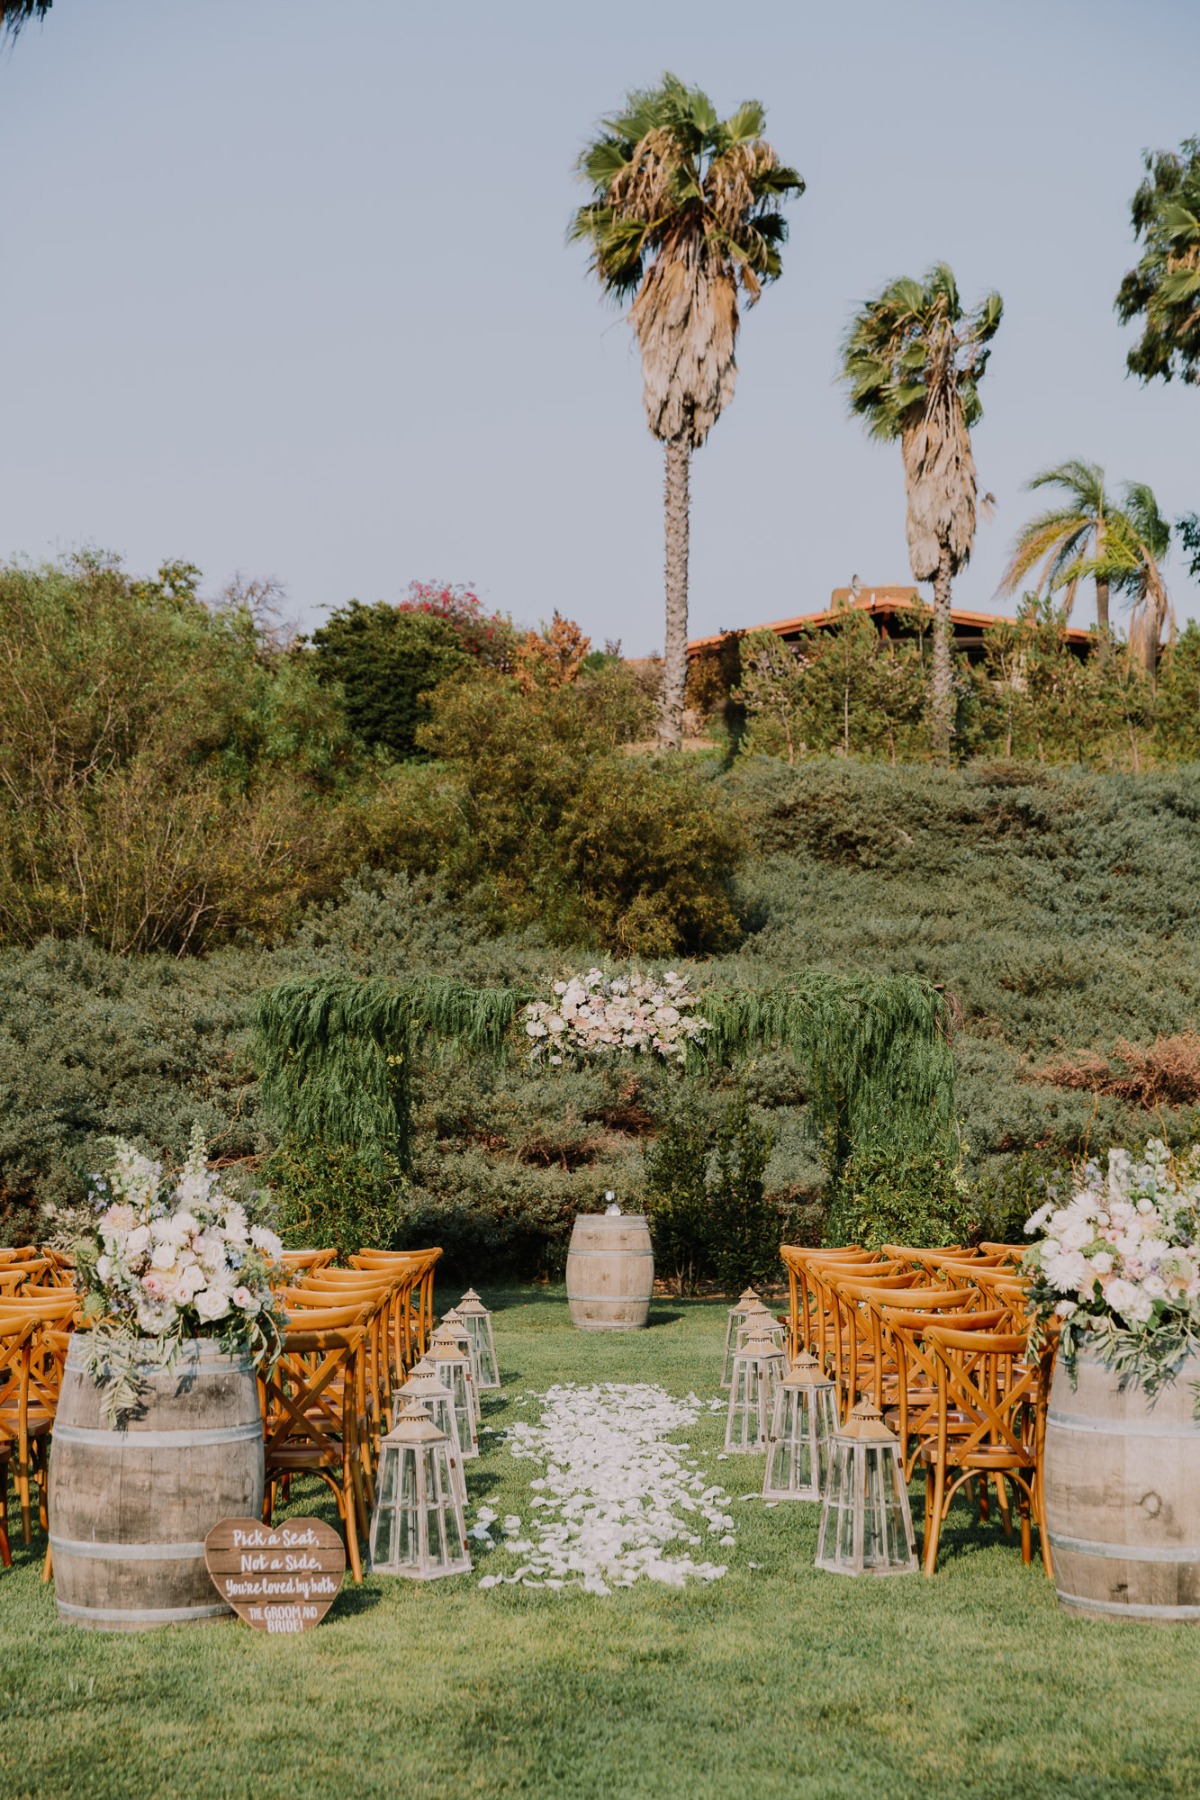 This Is The Boho Glam Wedding You've Been Dreaming Of